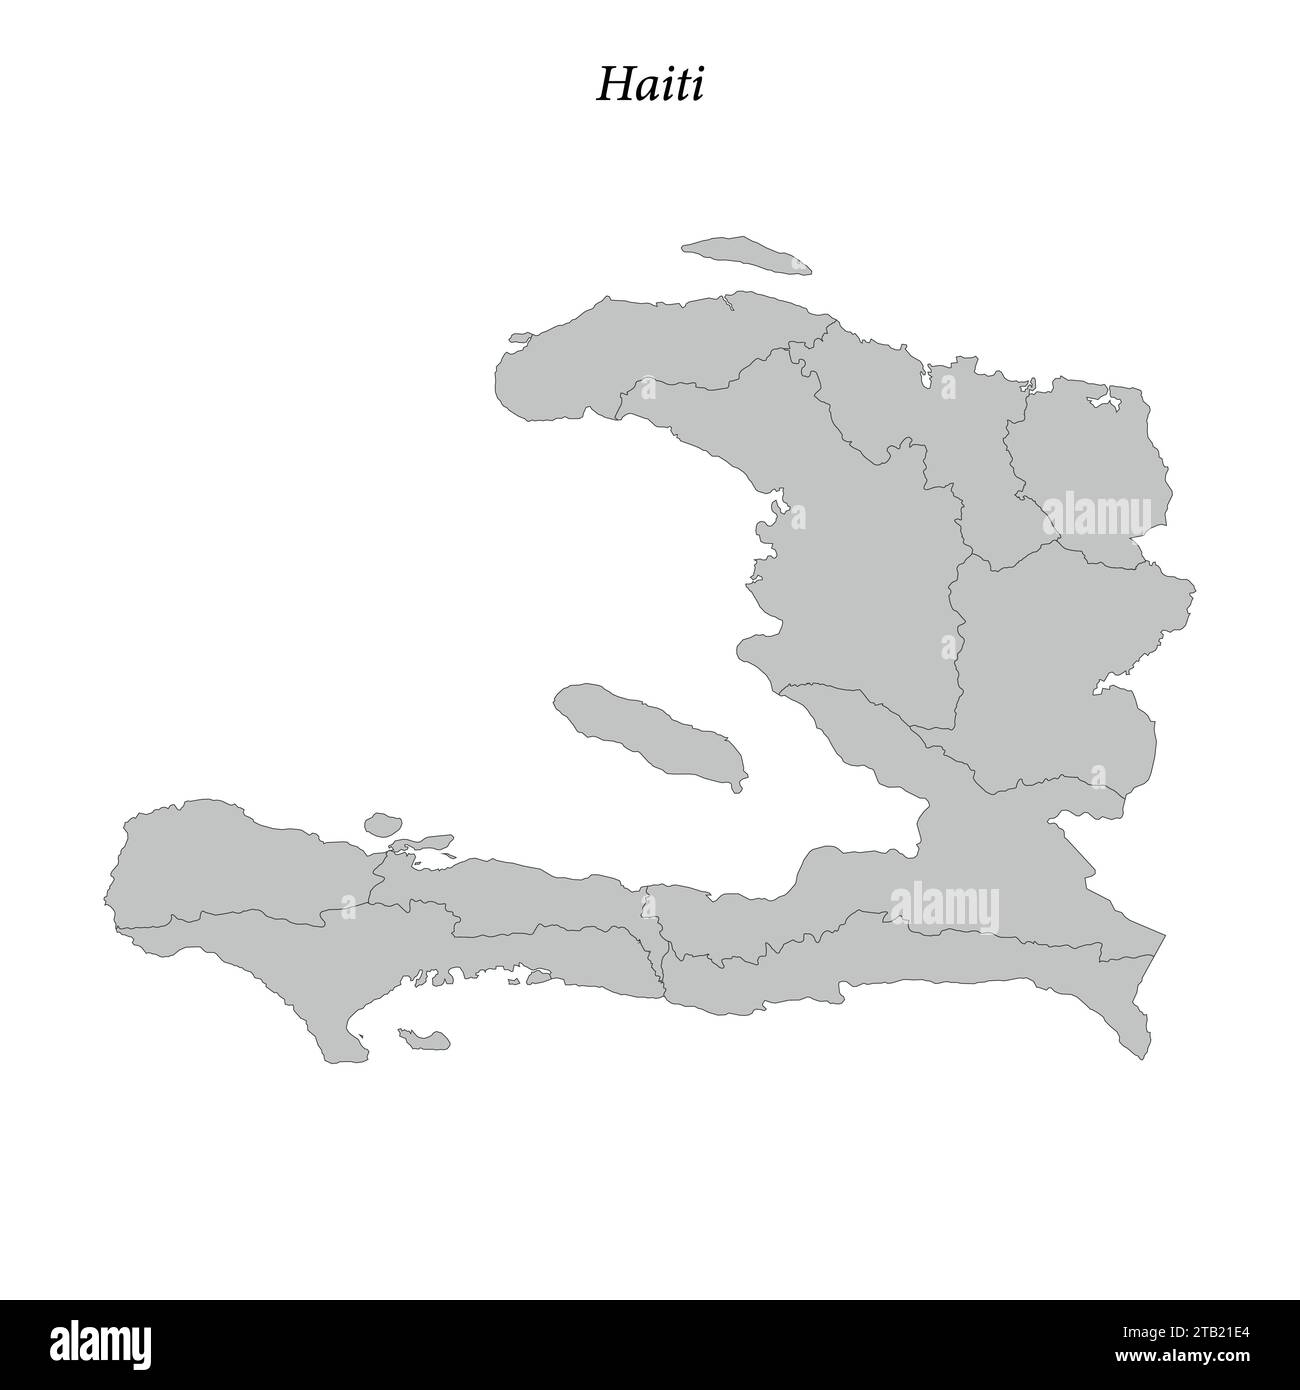 Simple flat Map of Haiti with district borders Stock Vector